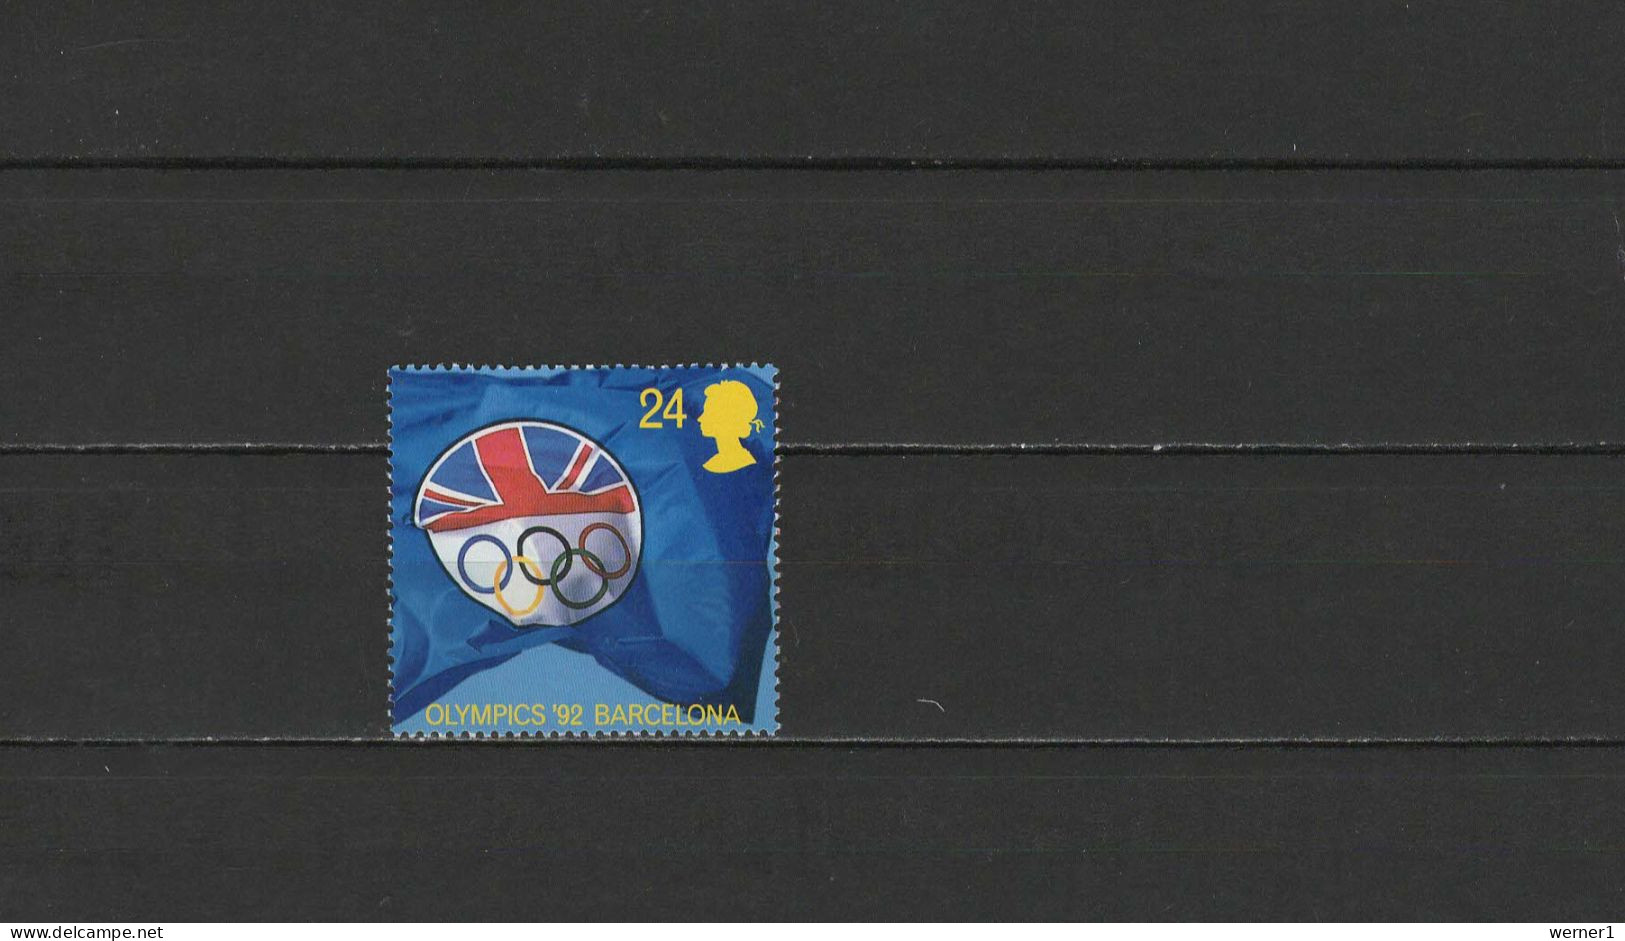 UK Great Britain England 1992 Olympic Games Barcelona Stamp MNH - Ete 1992: Barcelone